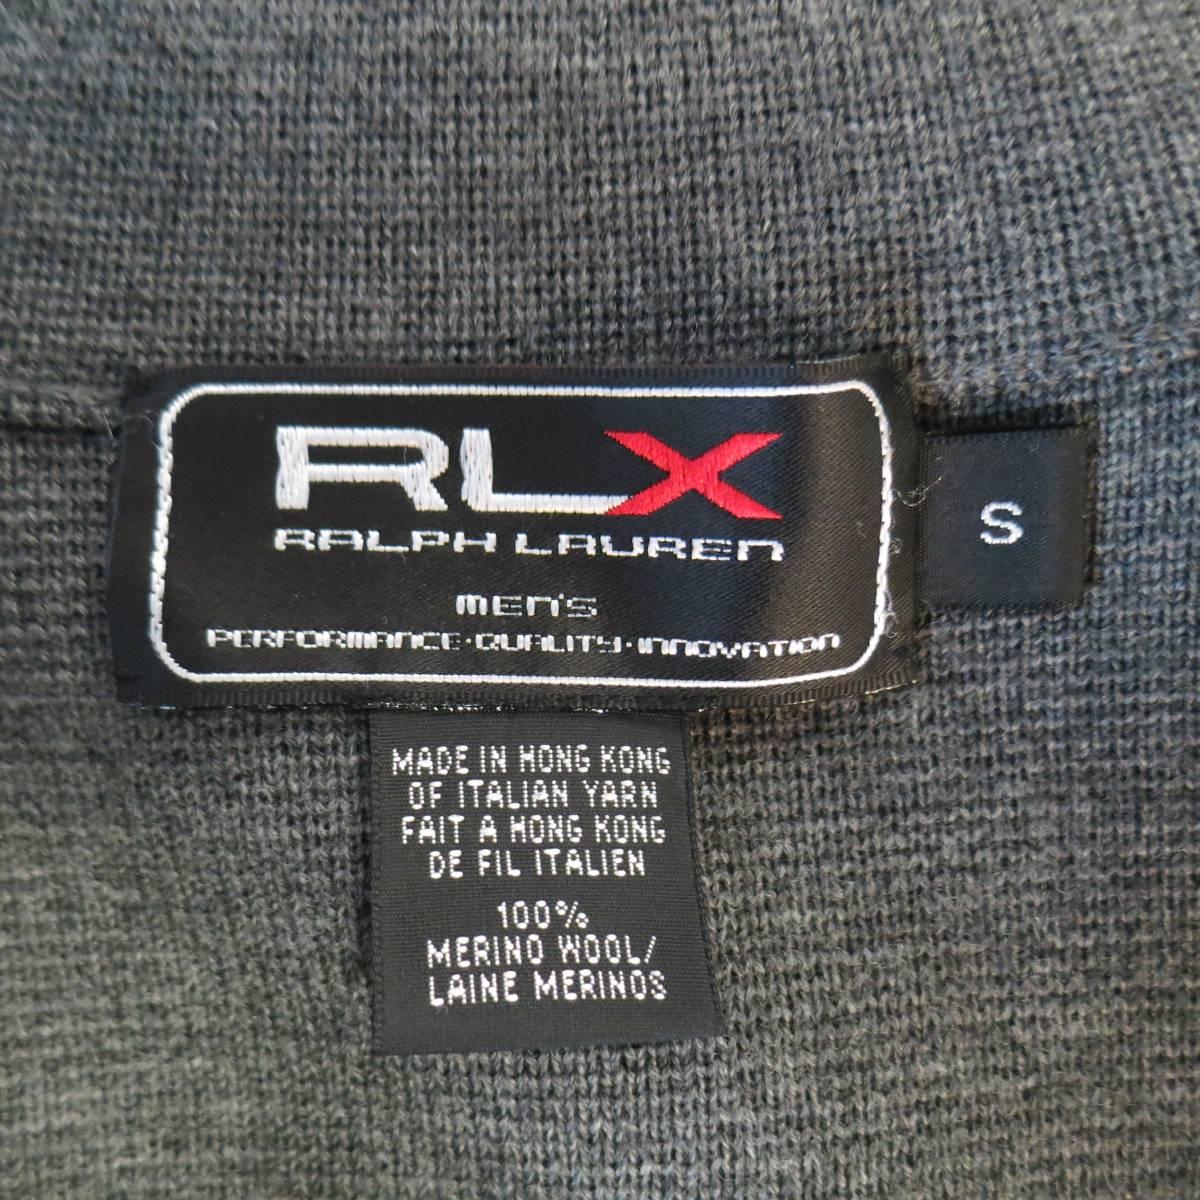 RLX by RALPH LAUREN S Grey Knitted Merino Wool Tan Leather Jacket 1